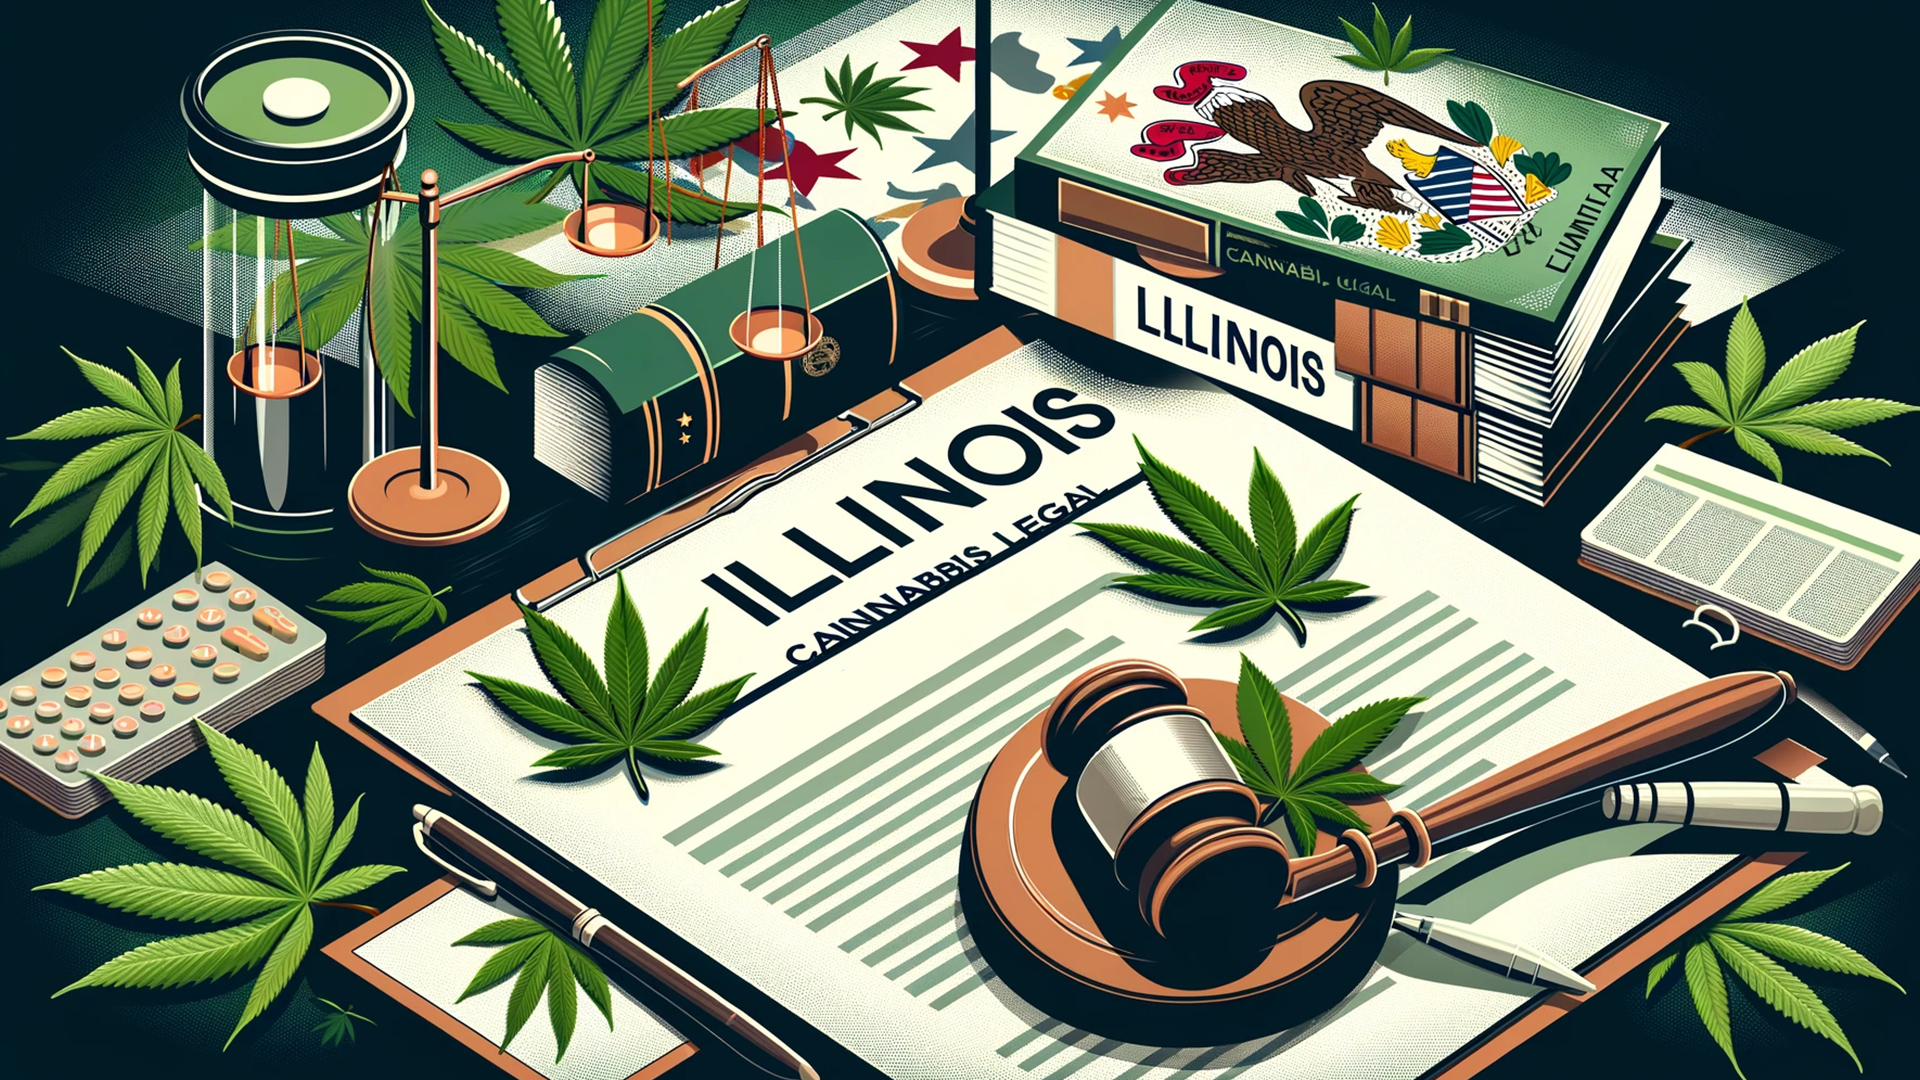 Illinois map with gavel, cannabis leaves, and legal documents symbolizing cannabis laws.